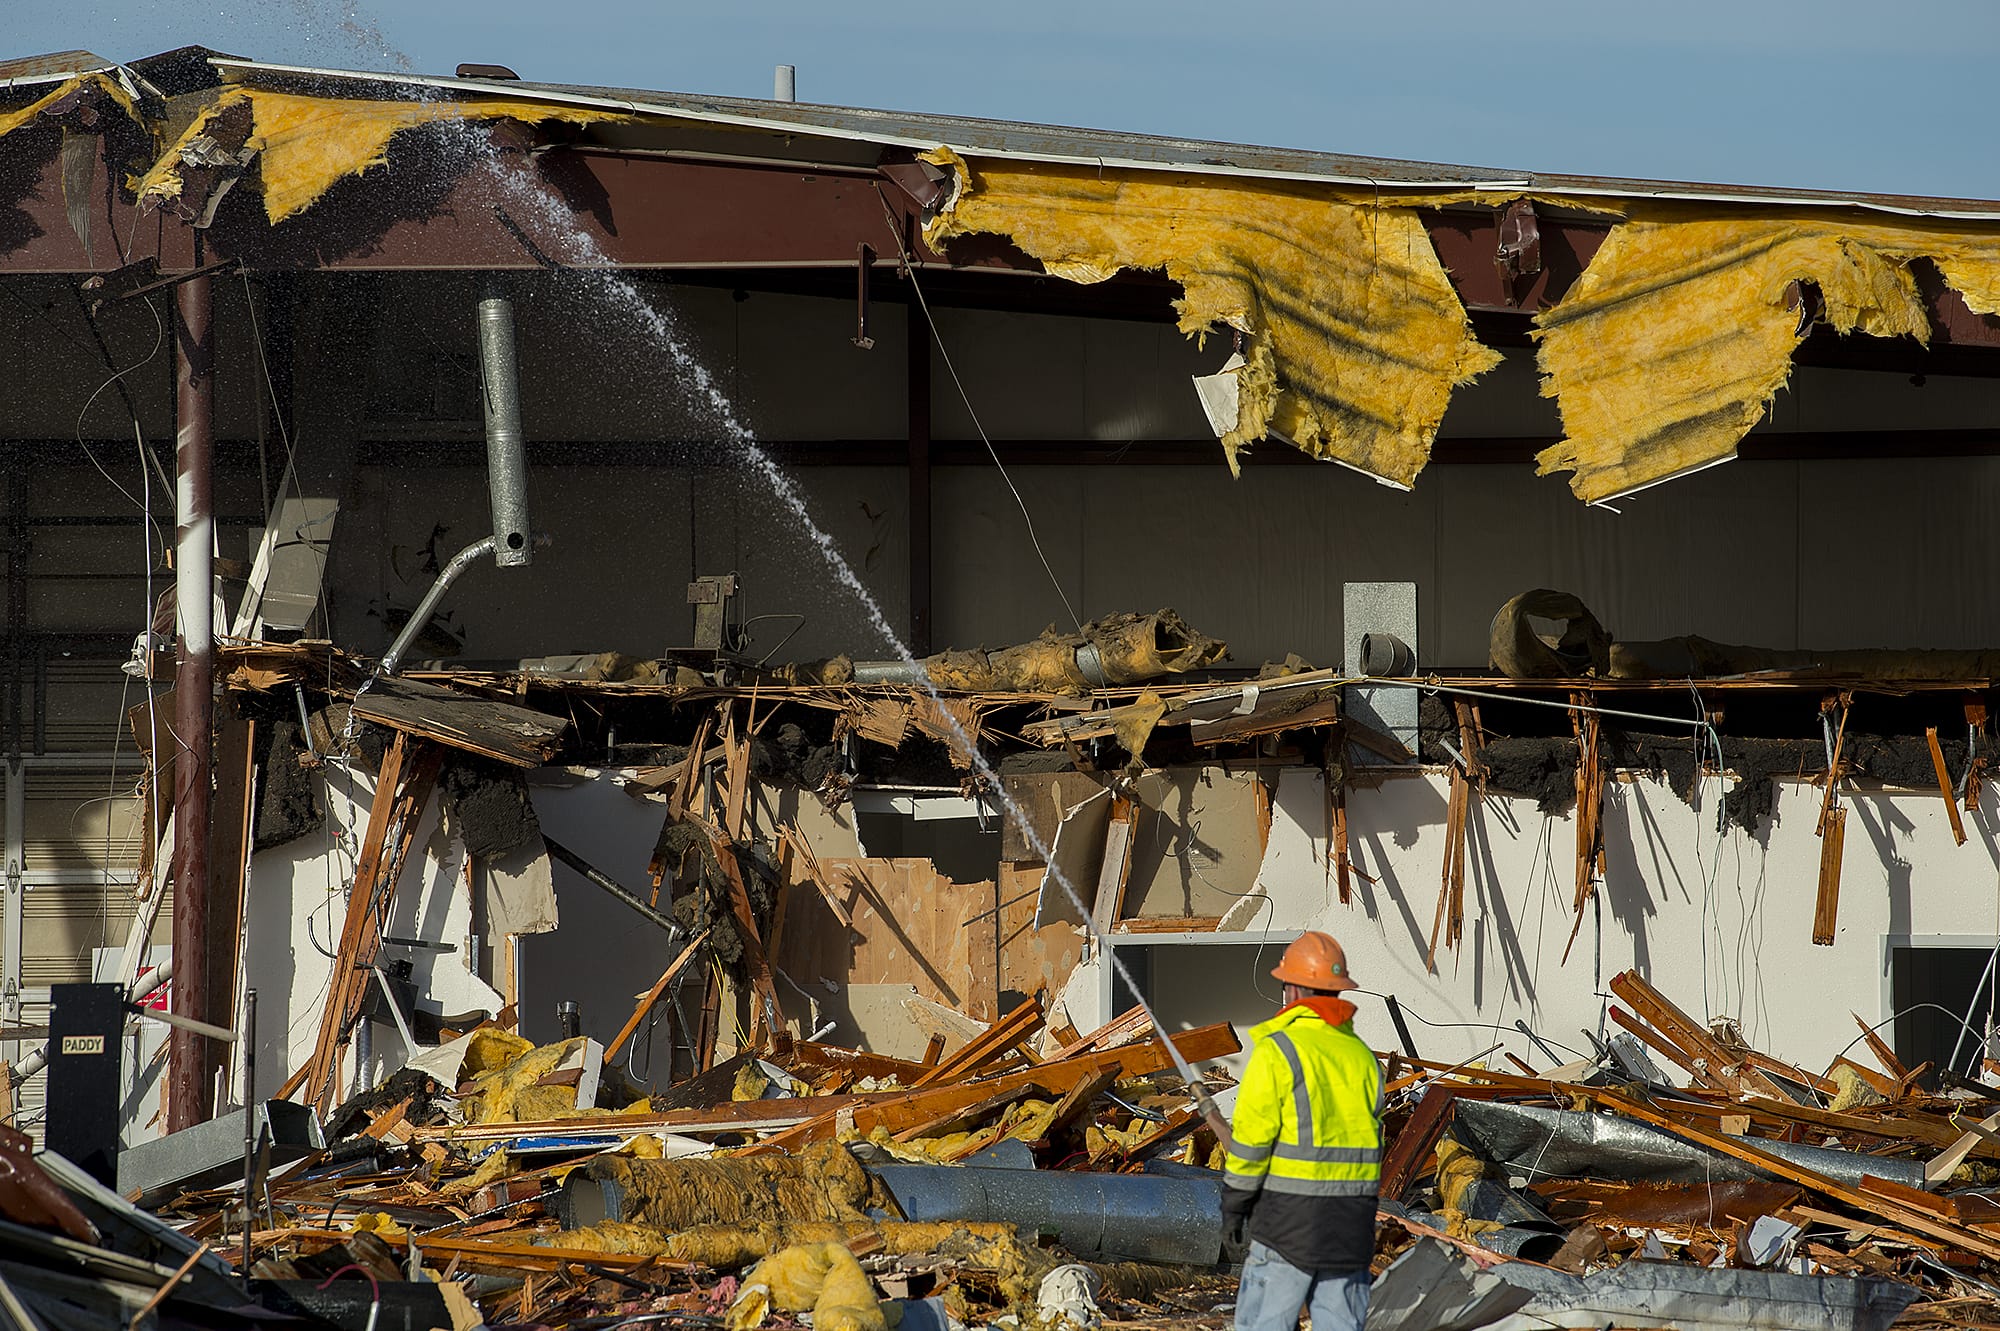 Josh Miller of JM Knelleken Company wets down materials during demolition of the former Petlock building in downtown Vancouver on Monday morning.